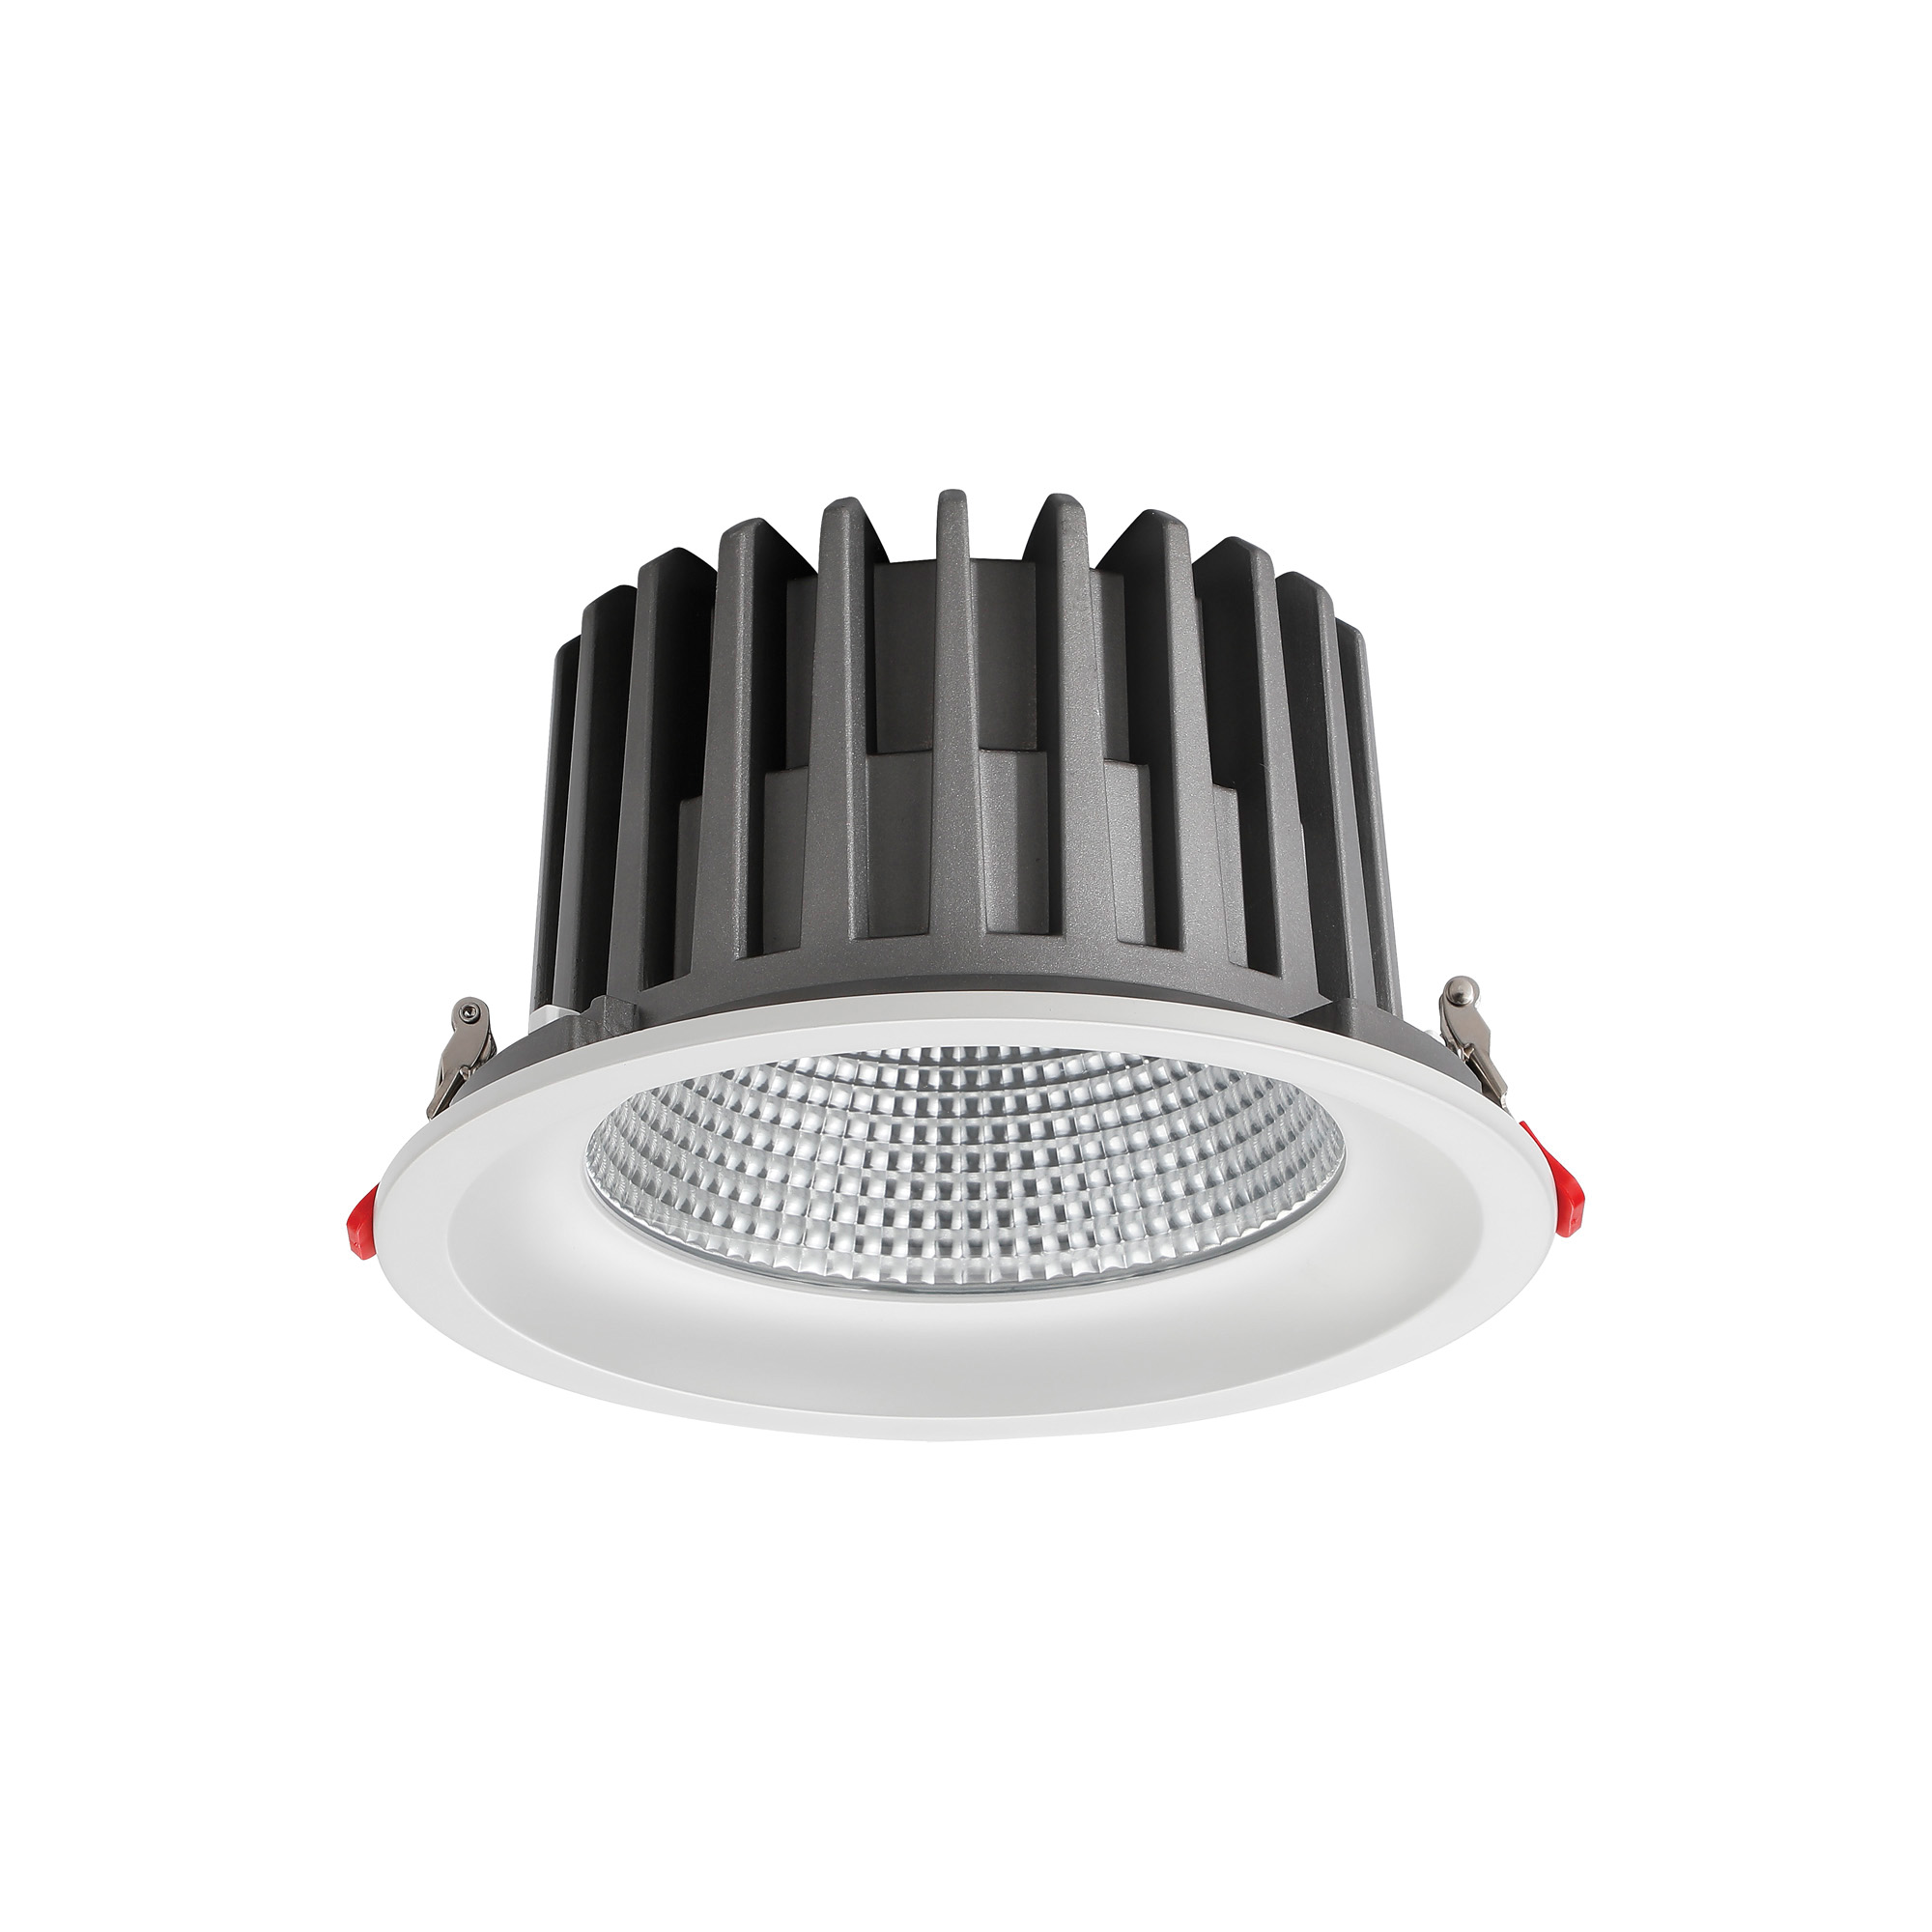 DL200069  Bionic 50; 50W; 1200mA; White Deep Round Recessed Downlight; 4500lm ;Cut Out 175mm; 50° ; 5000K; IP44; DRIVER INC.; 5yrs Warranty.